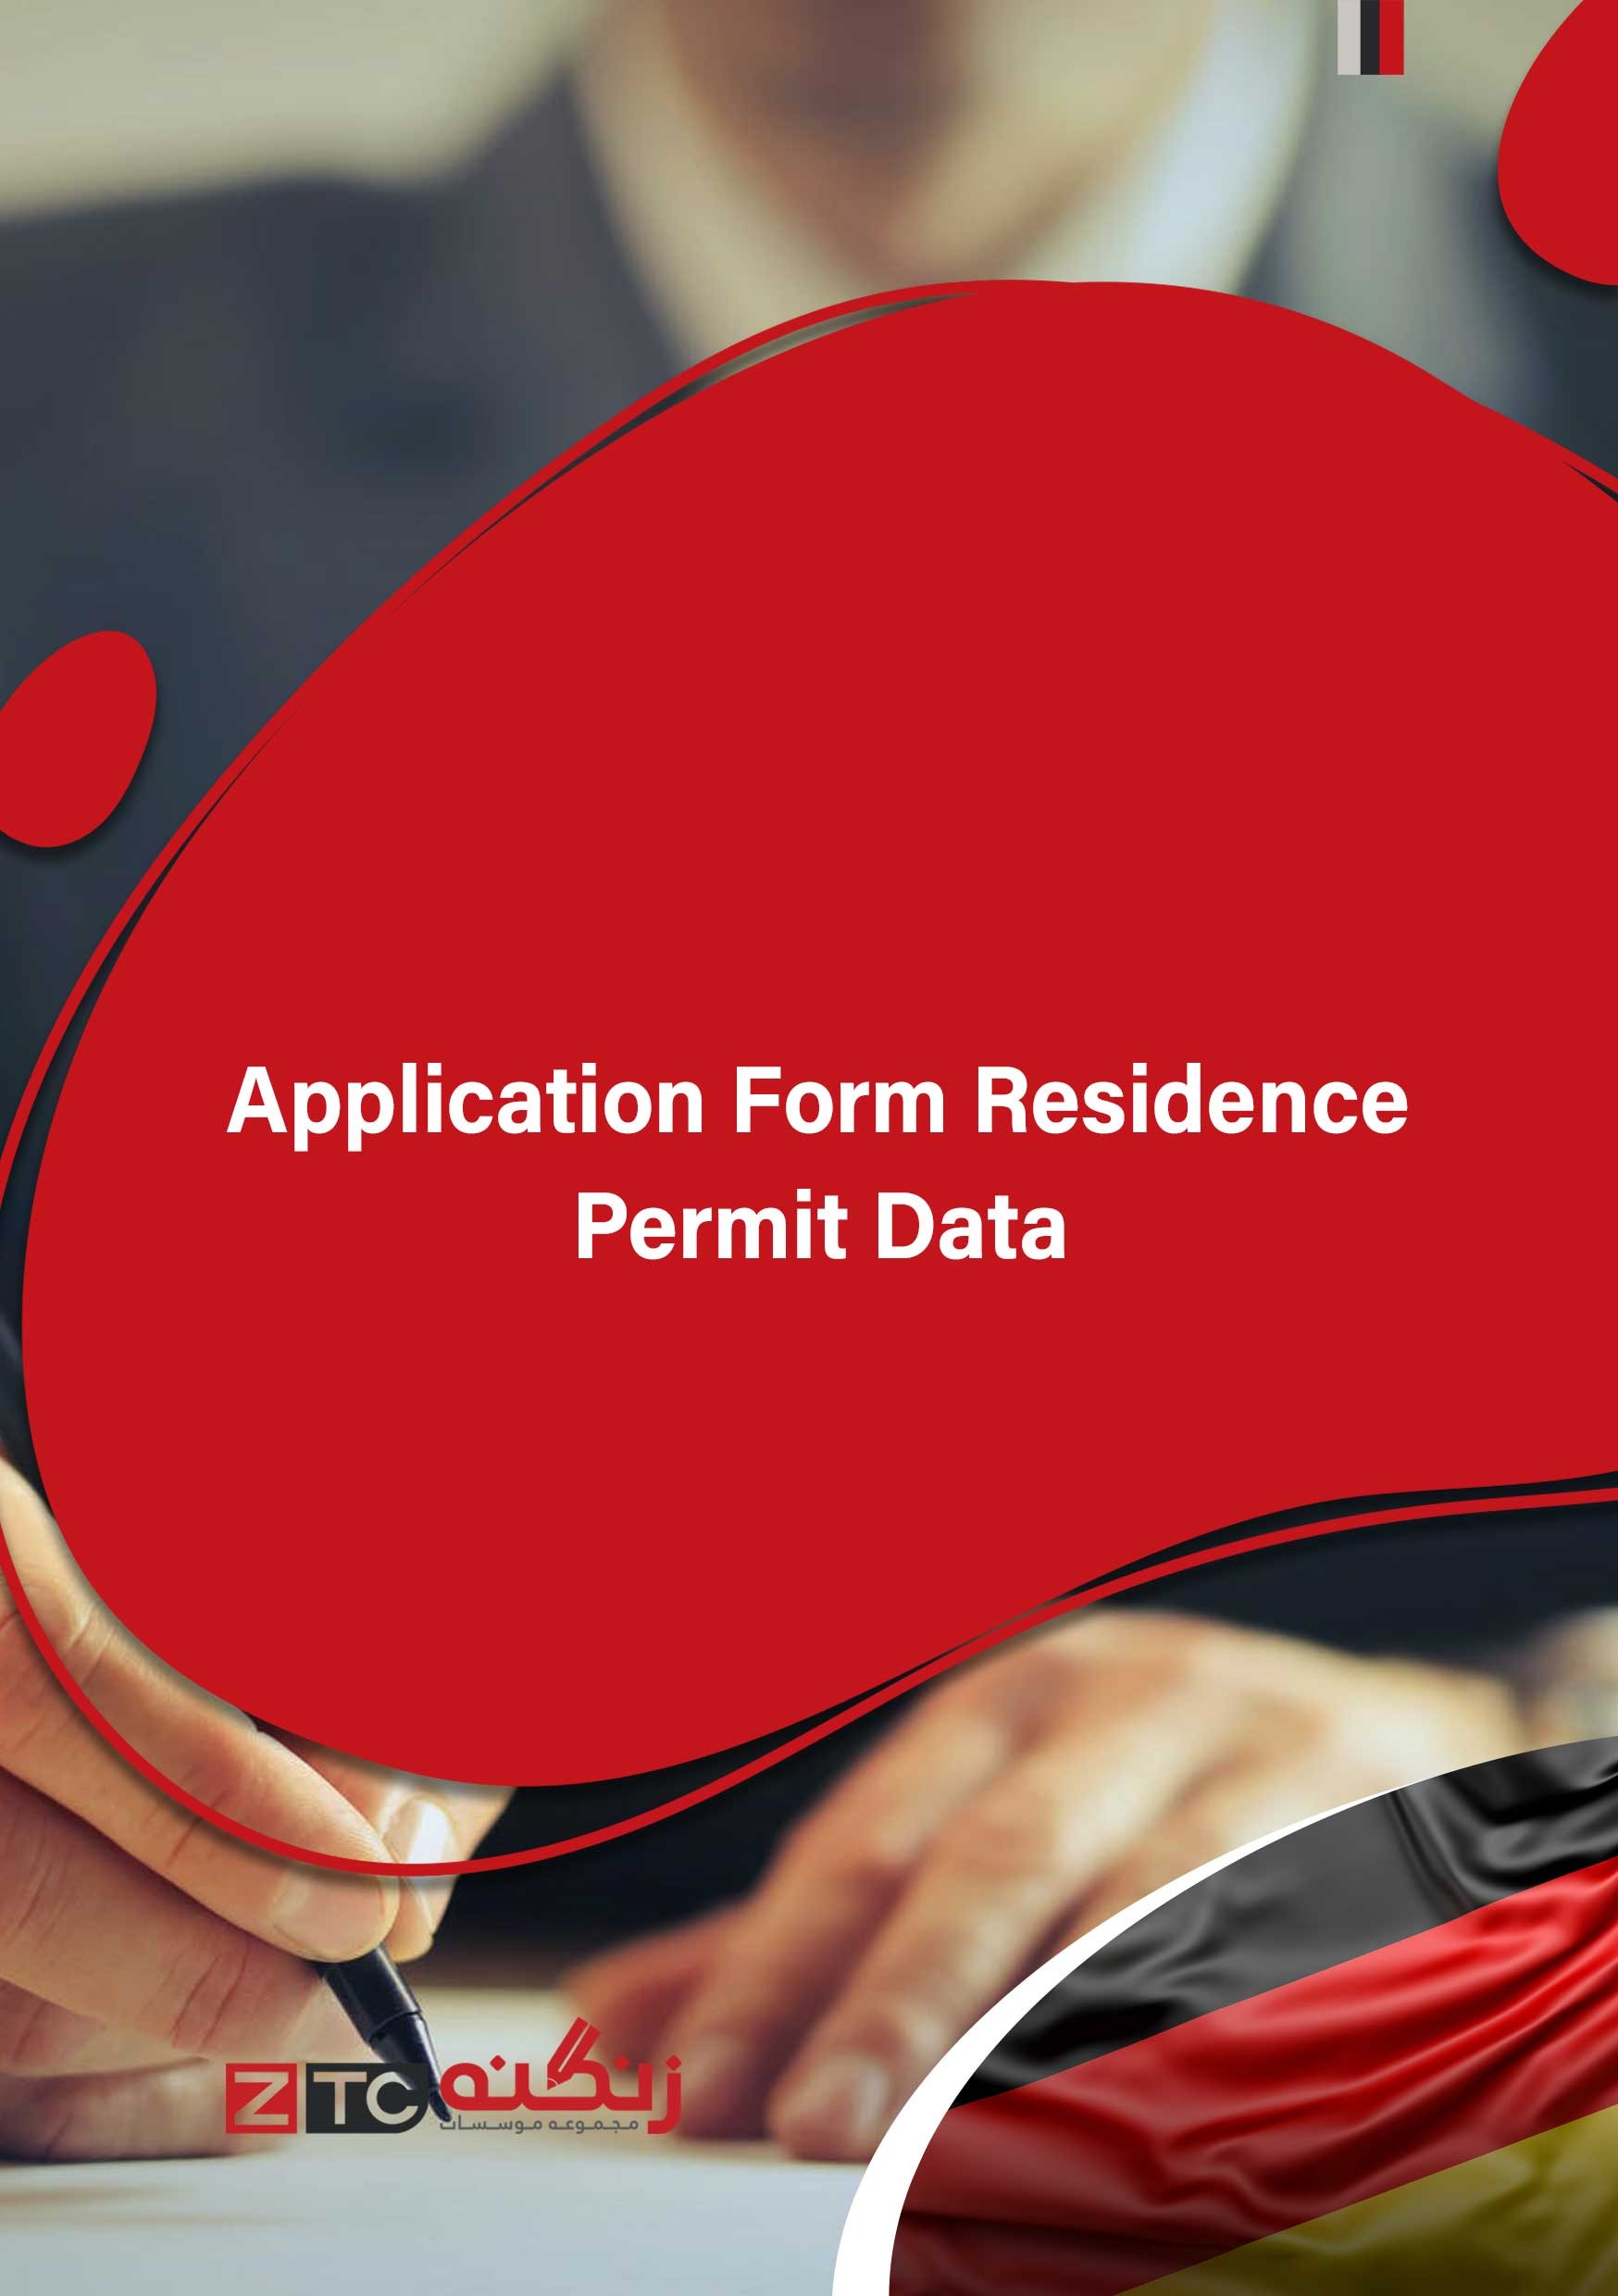 Application Form Residence Permit Data